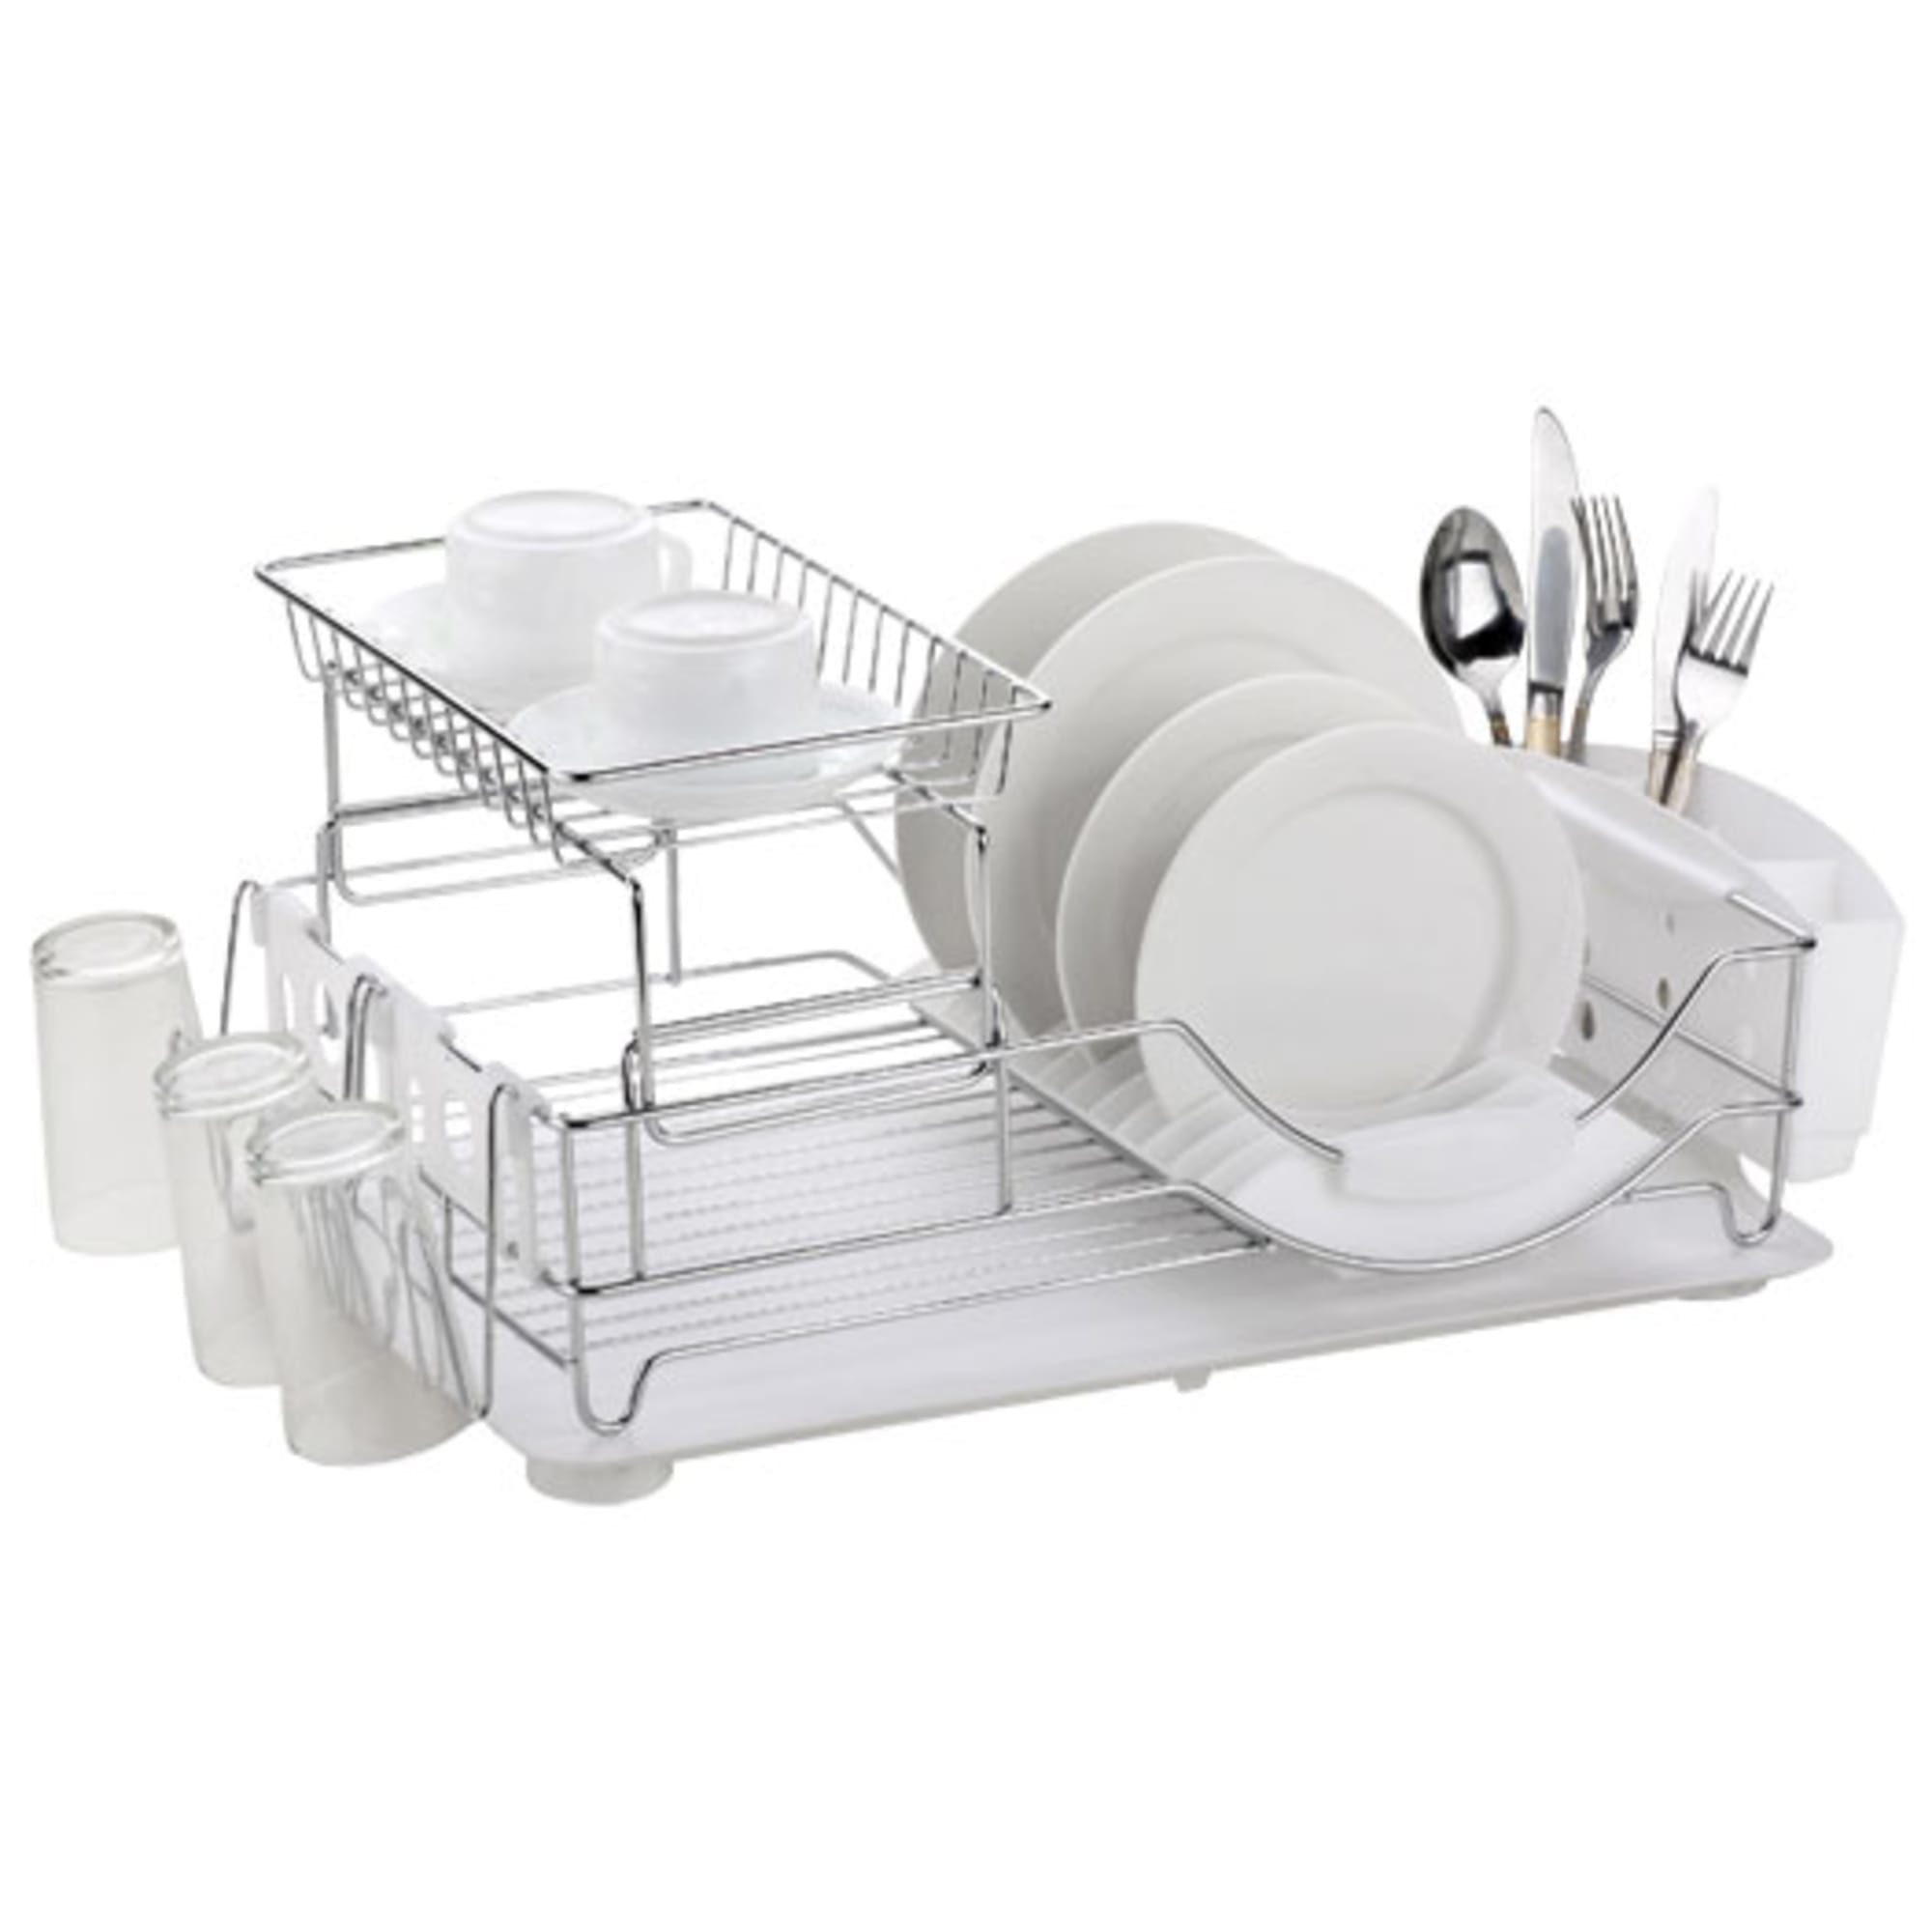 Rubbermaid Home Twin Sink Dish Drainer, Chrome